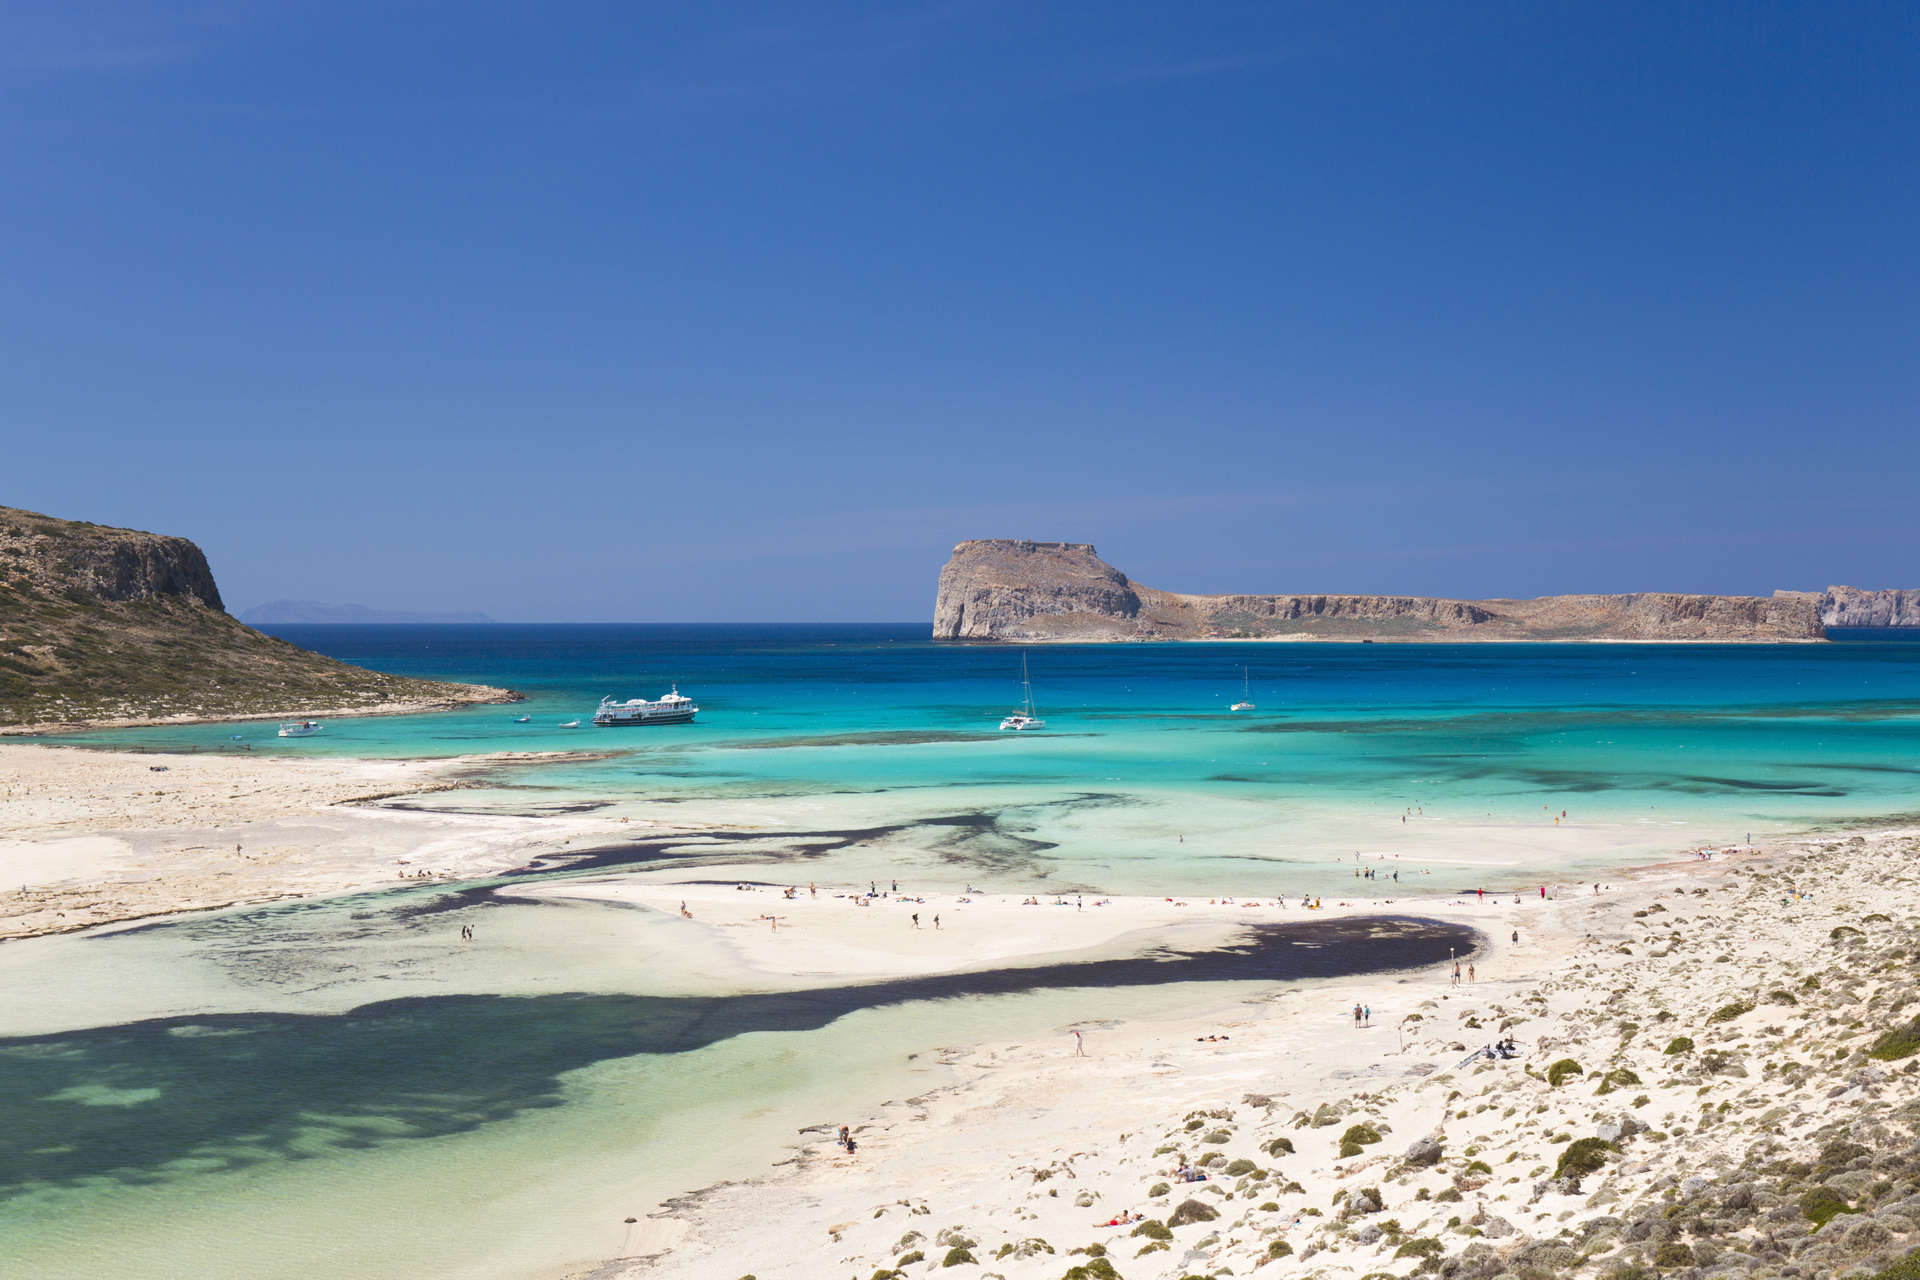 Walk barefoot over the white sands of Crete's Balos Beach, gazing out at the lagoon's turquoise waters, for a travel experience to remember